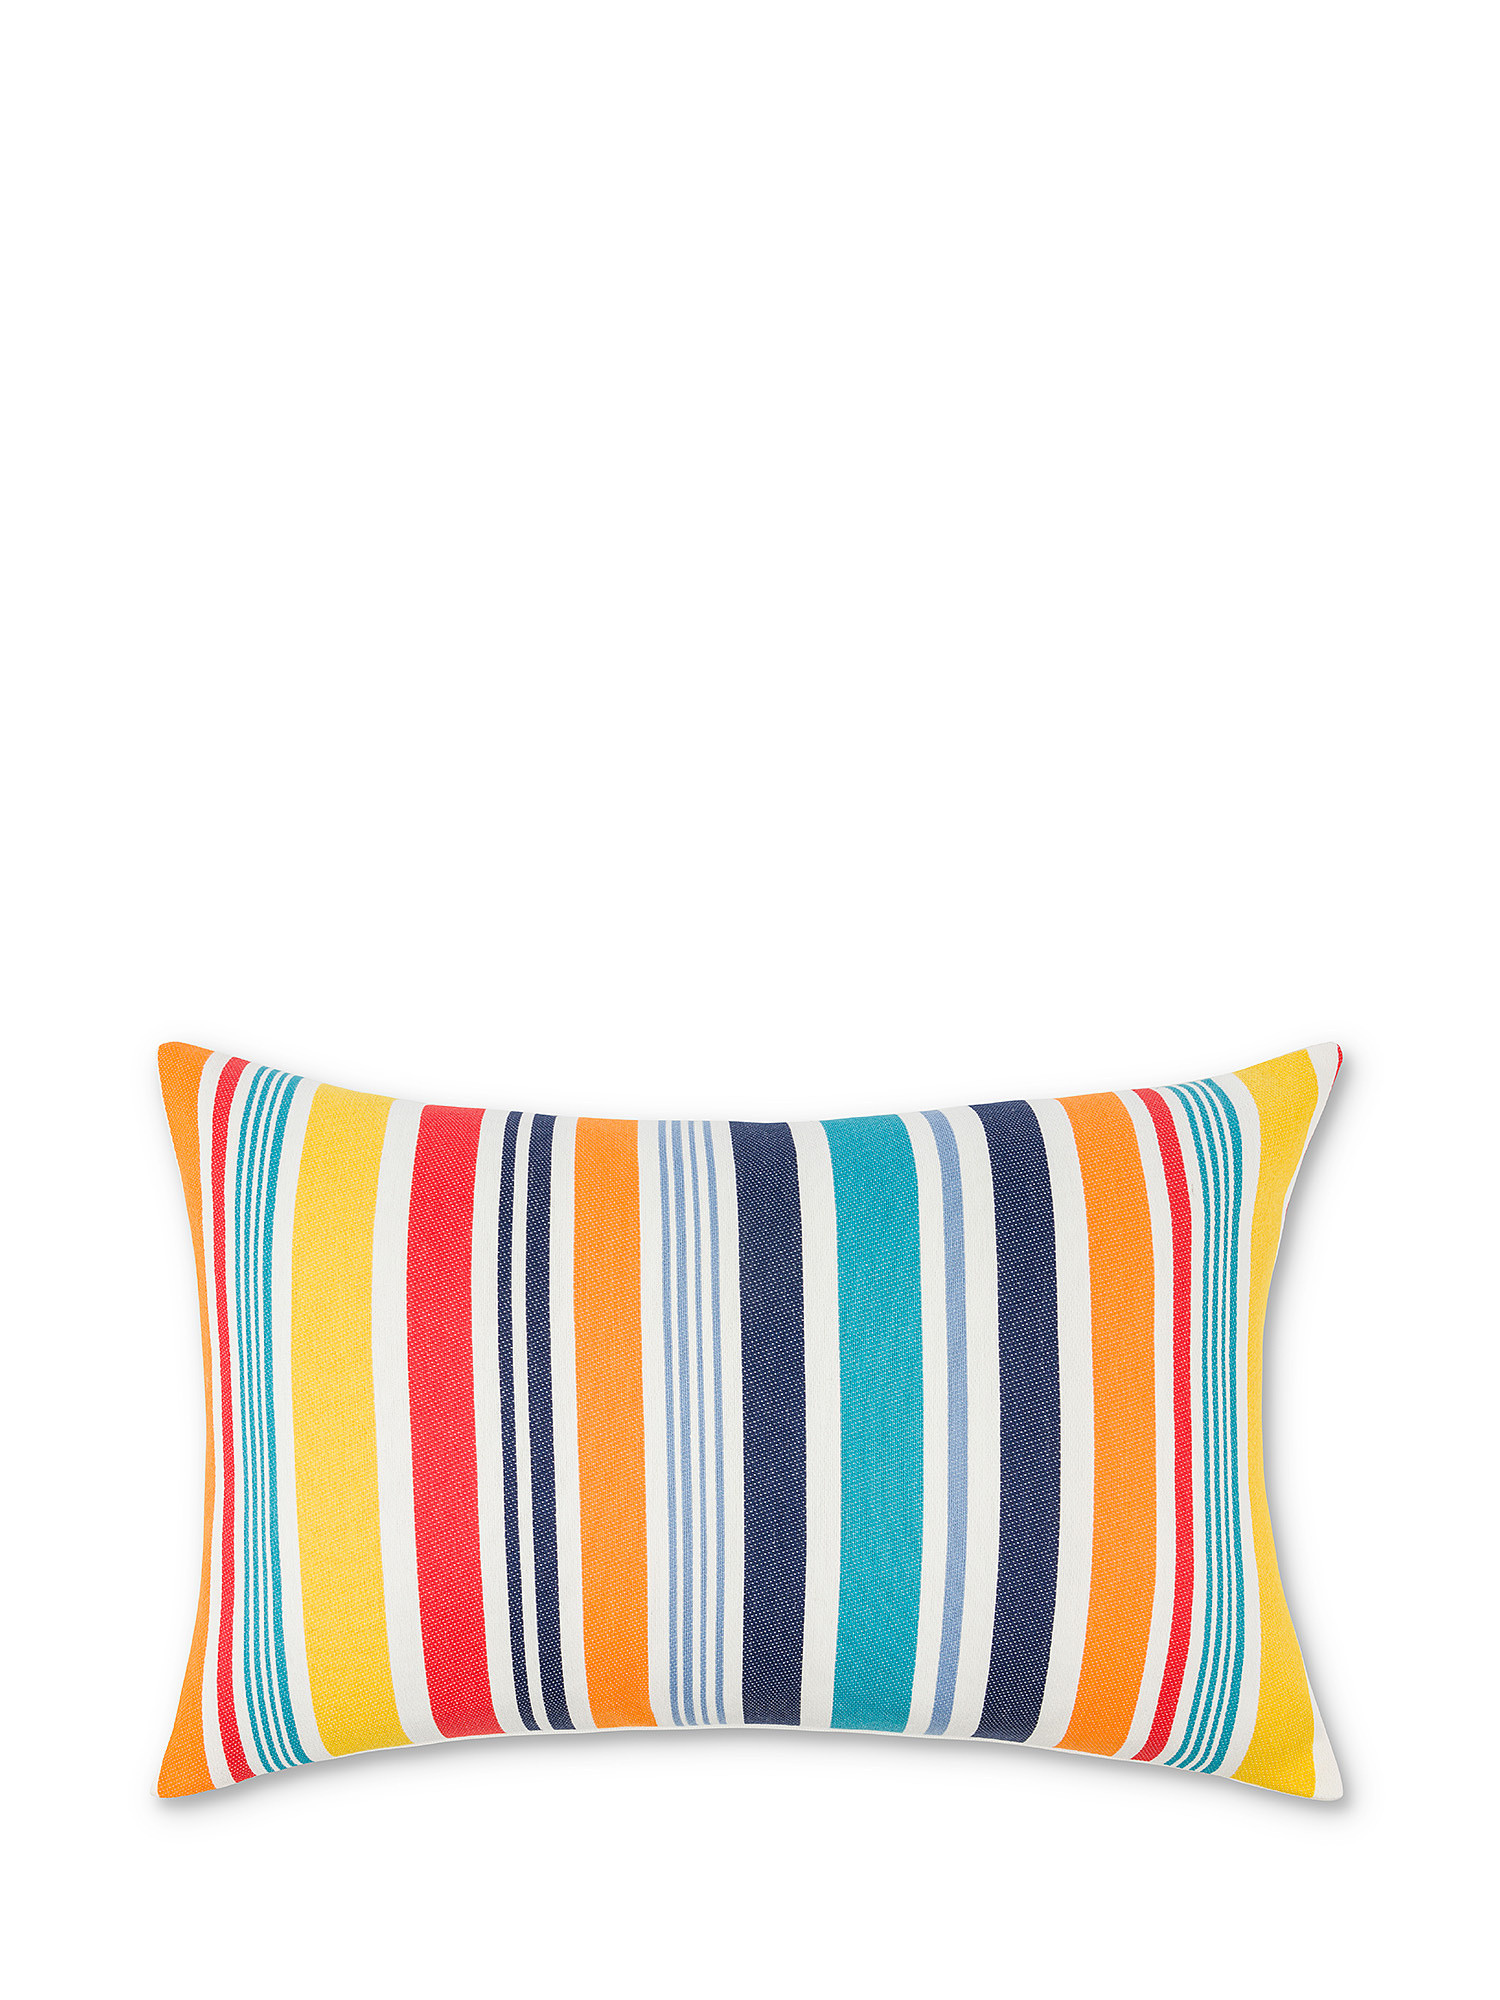 Striped fabric cushion 35x55cm, Multicolor, large image number 0